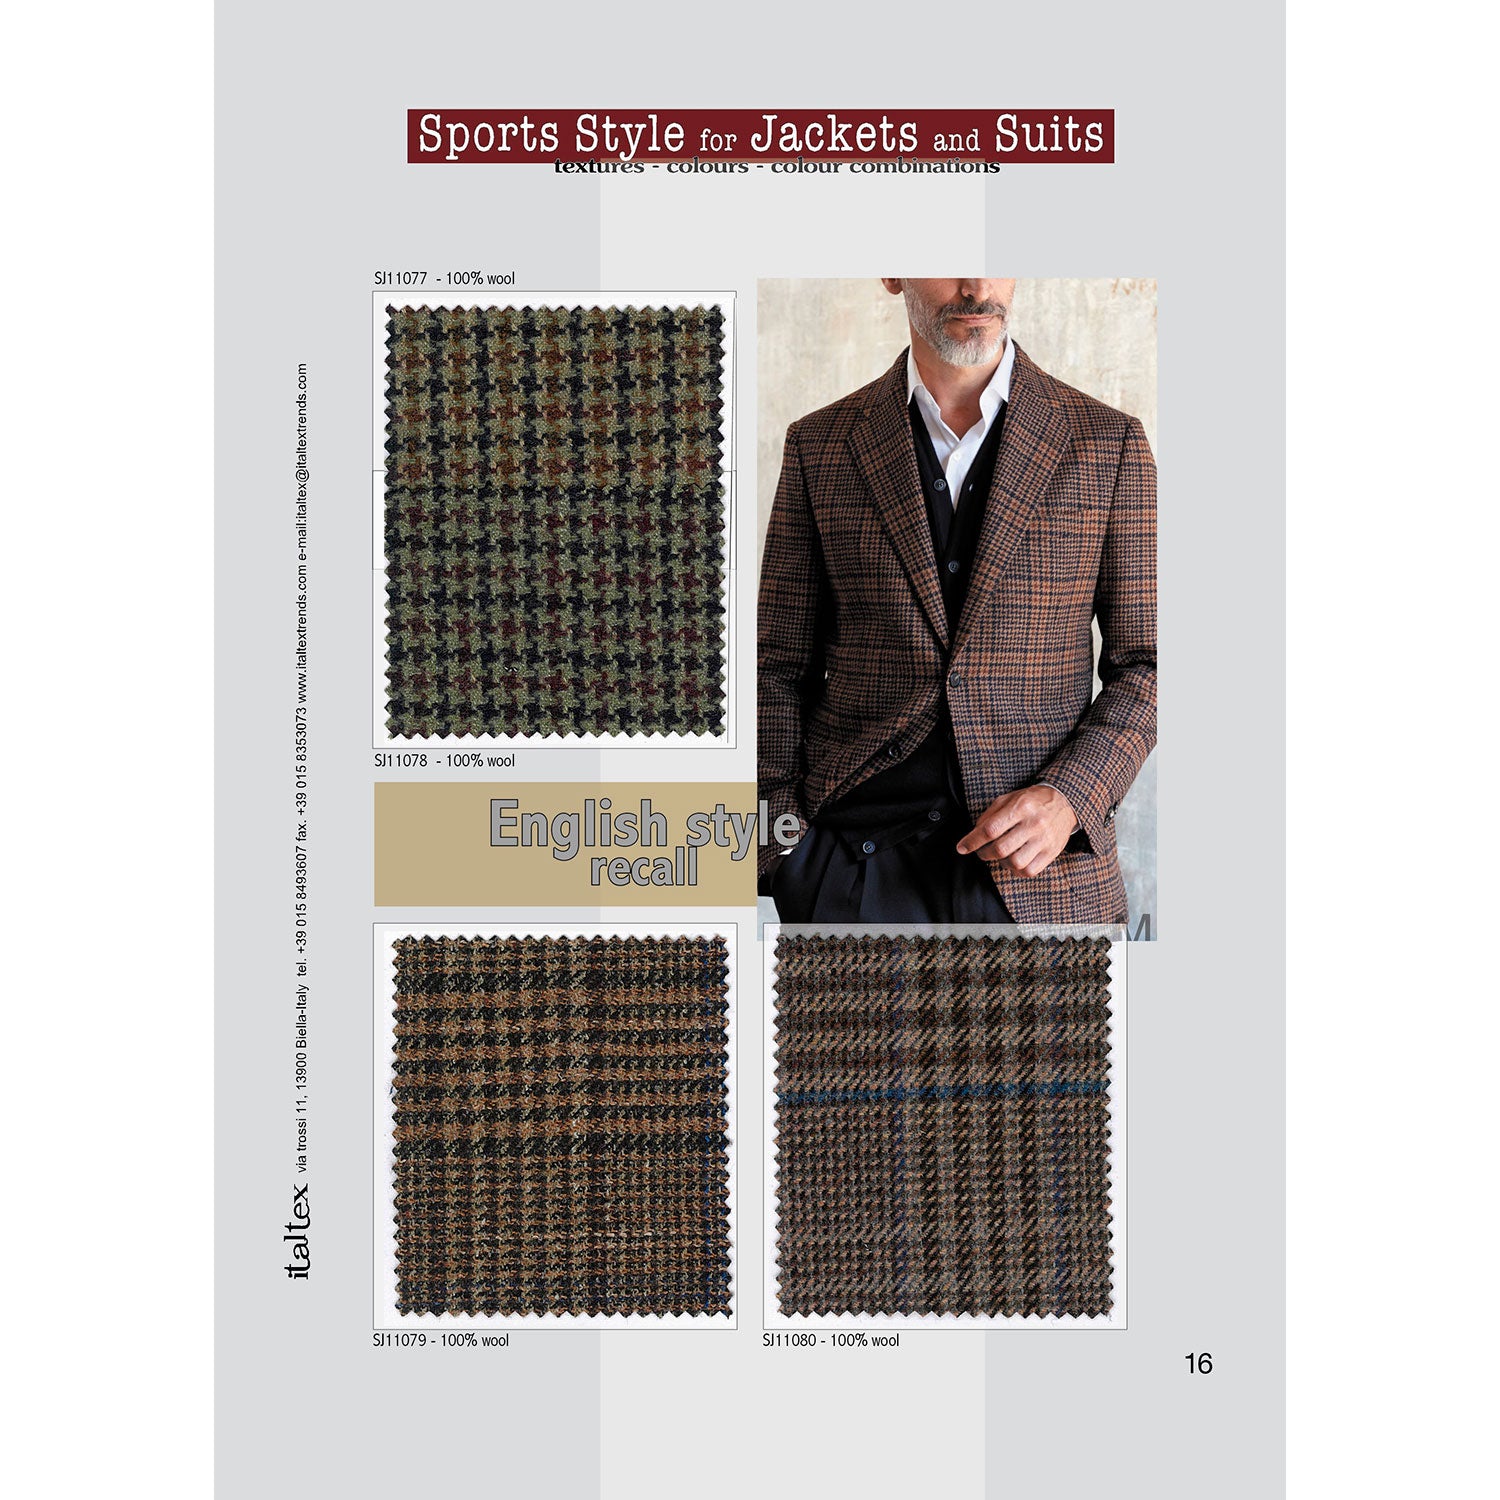 SPORTS STYLE FOR JACKETS AND SUITS Autumn/Winter 2025/26